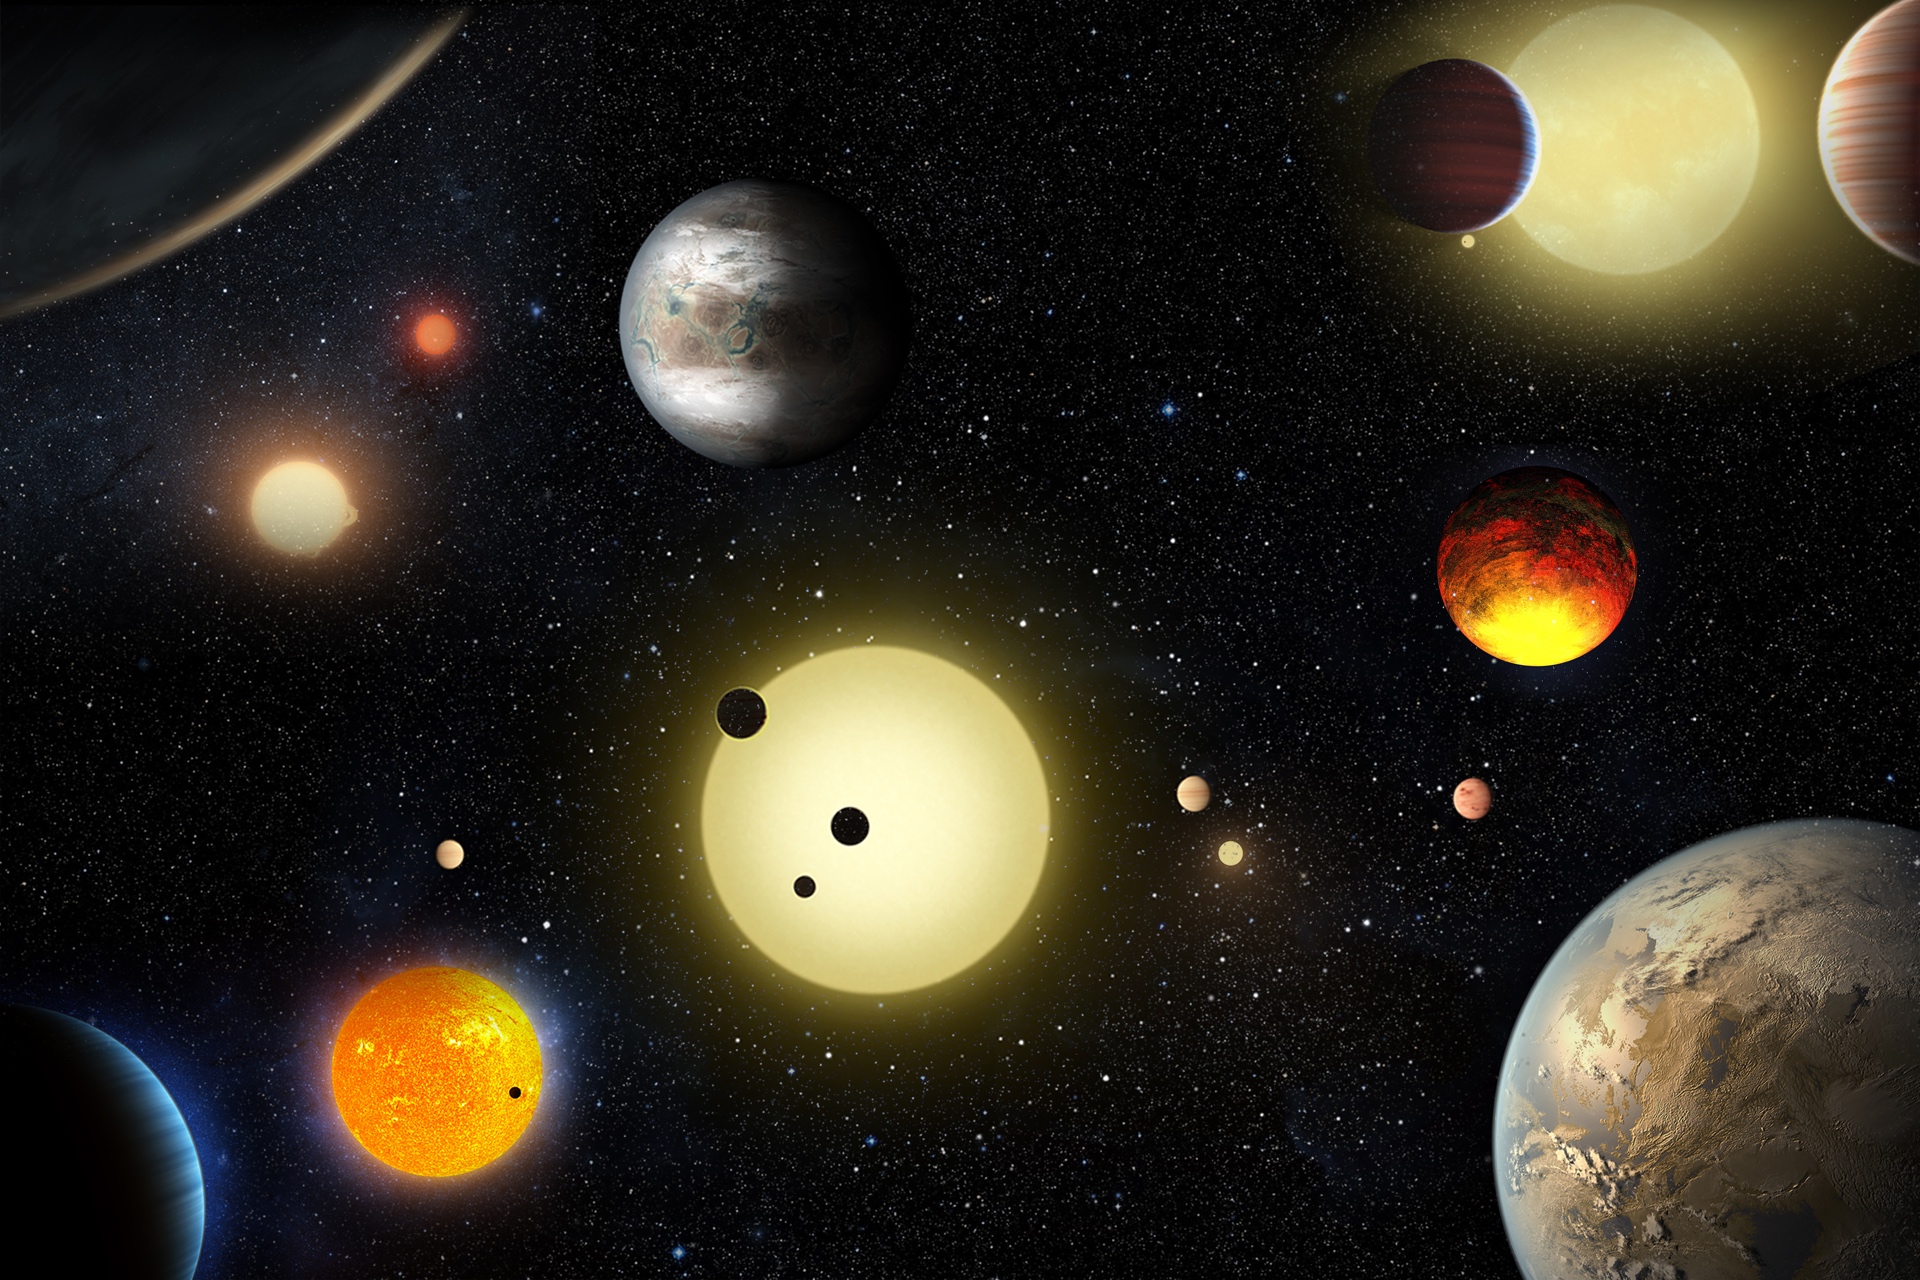 An artistic representation of exoplanets. (Credit: NASA/W. Stenzel)